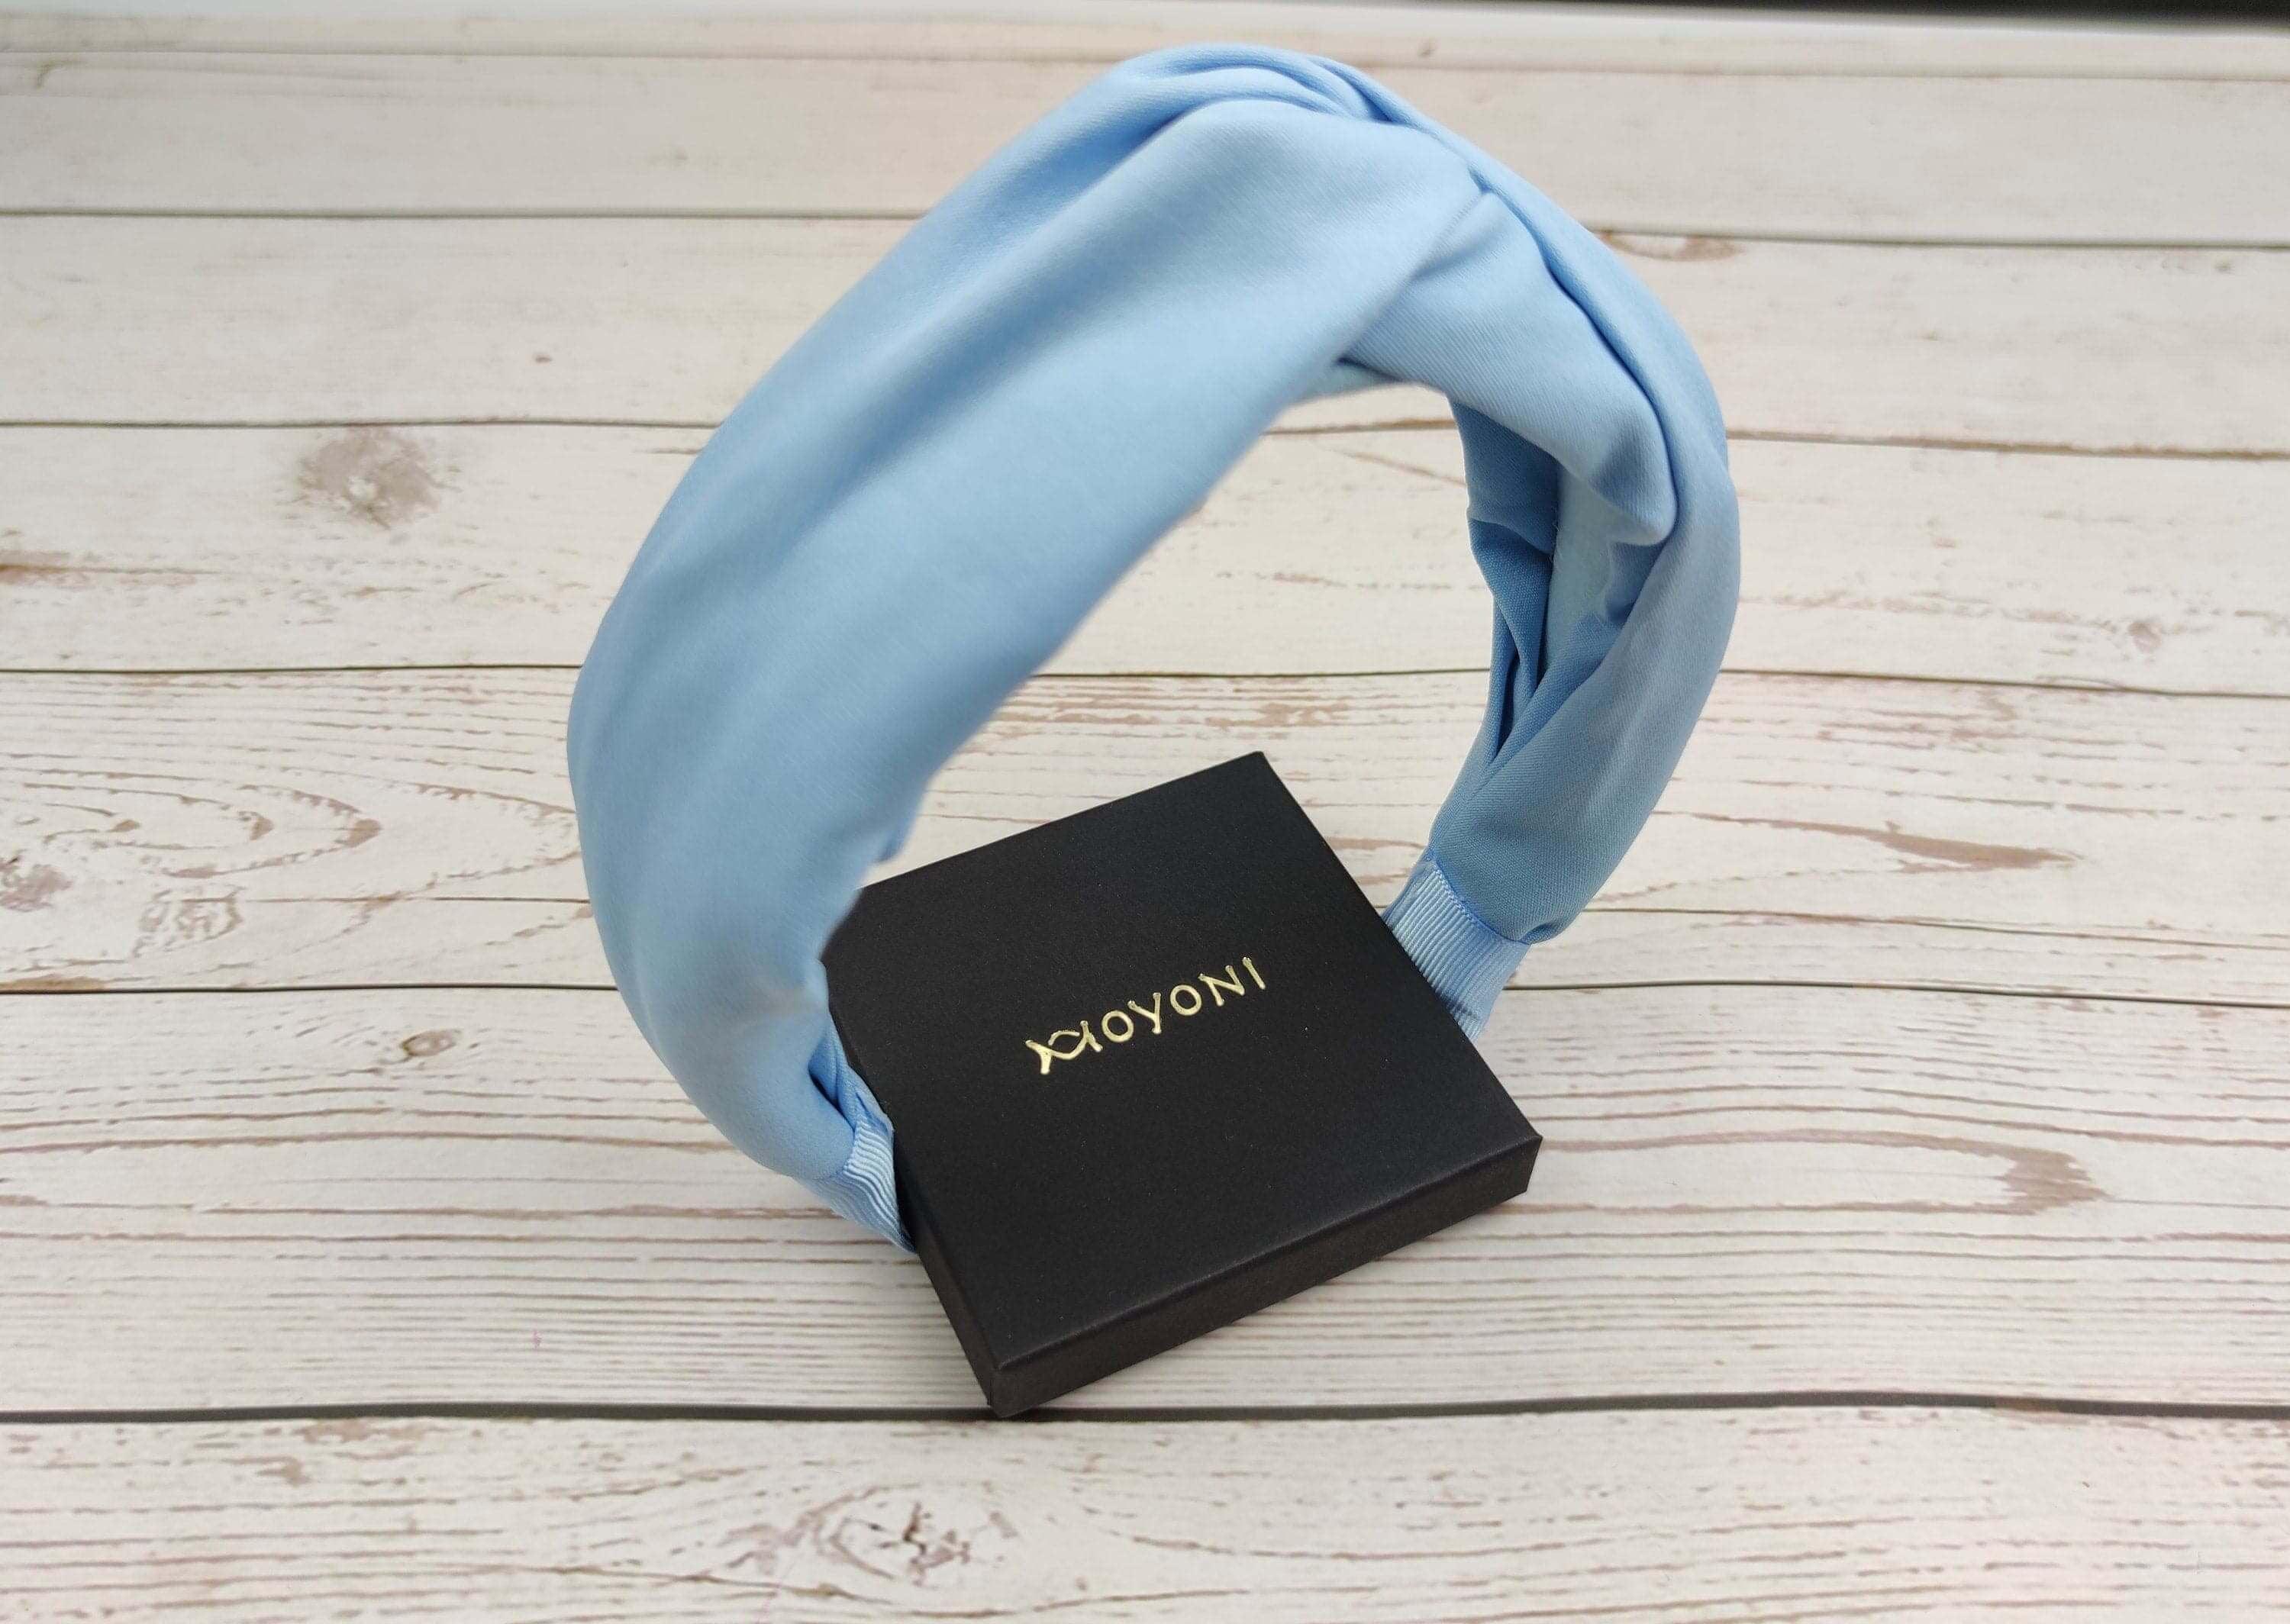 Charming Baby Blue Twist Knot Headband - Women's Classic and Fashionable Light Blue Hairband made of Viscose Crepe available at Moyoni Design